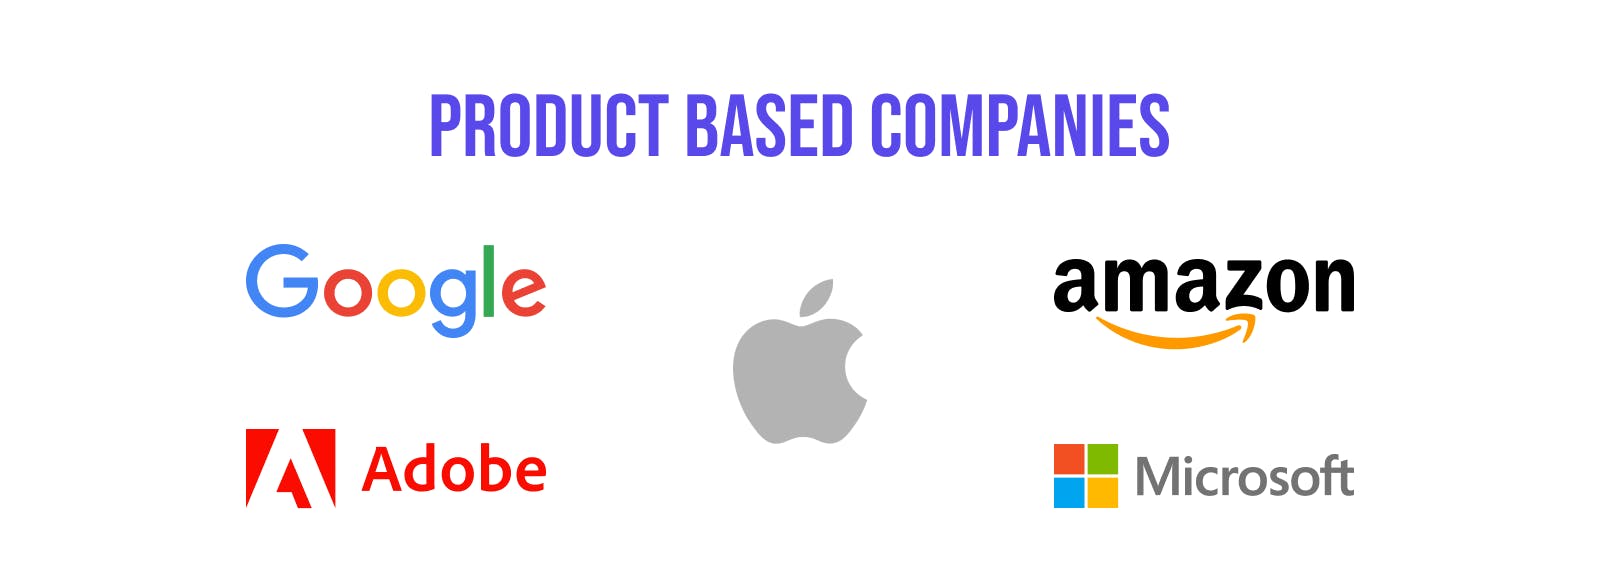 List of Product Based Companies